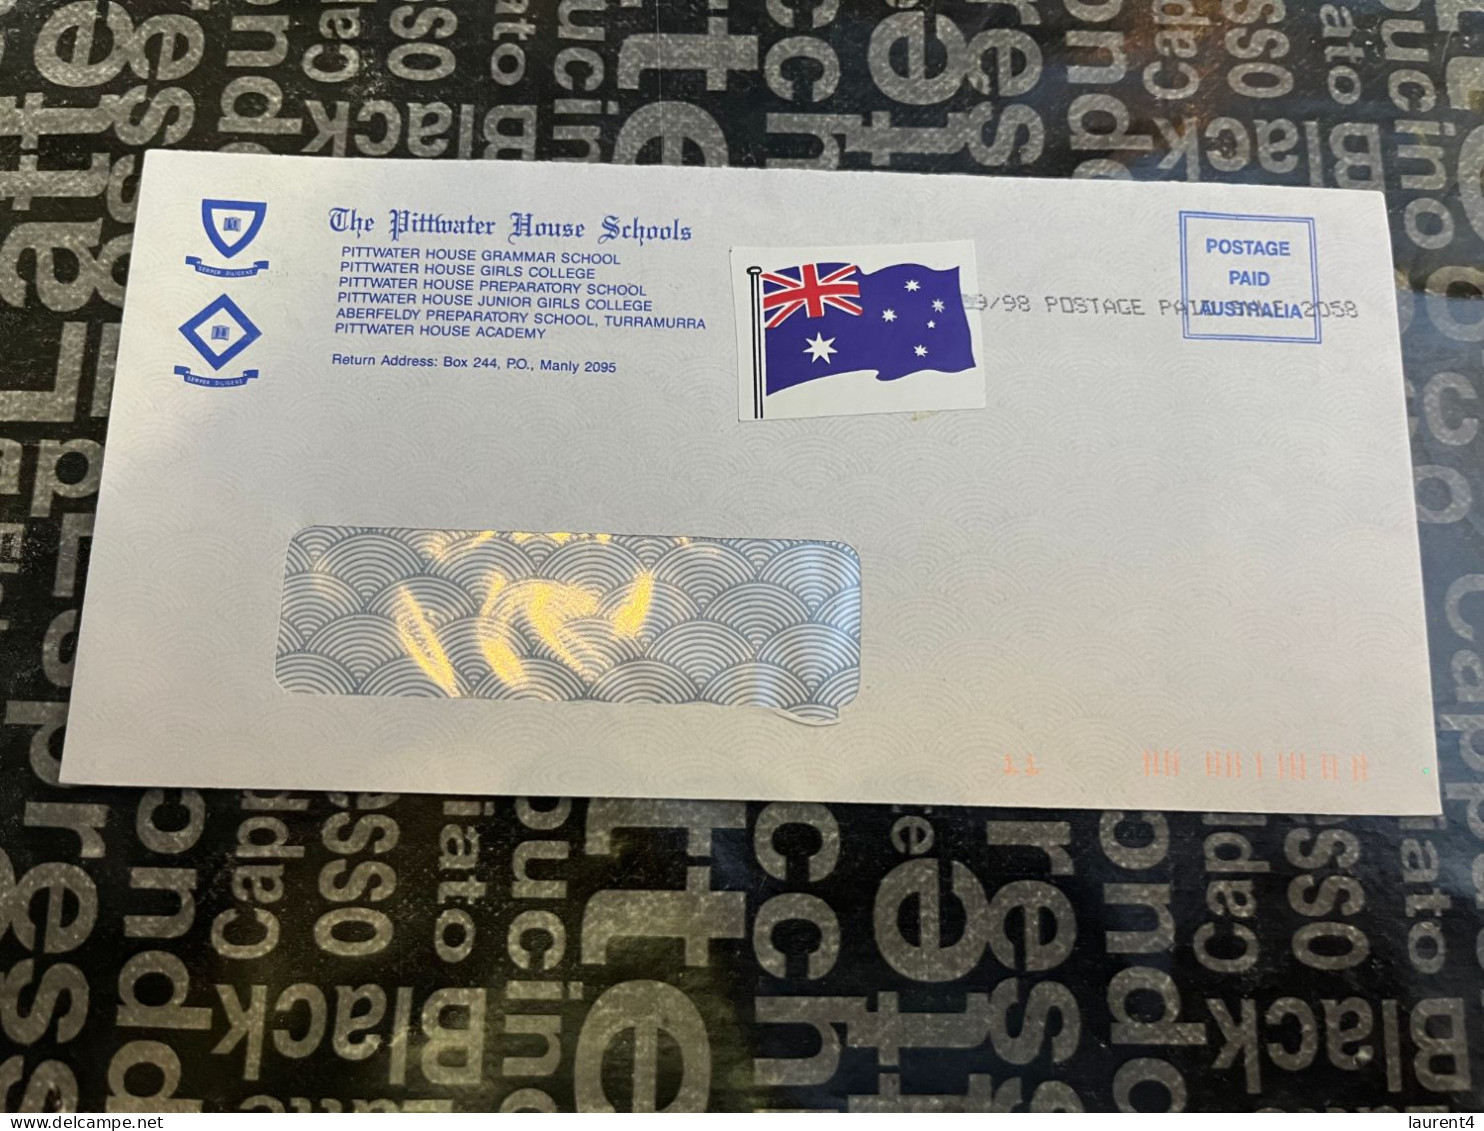 15-1-2024 (1 X 14) 2 Letter Posted Within Australia - Postage Paid Marking - Covers & Documents